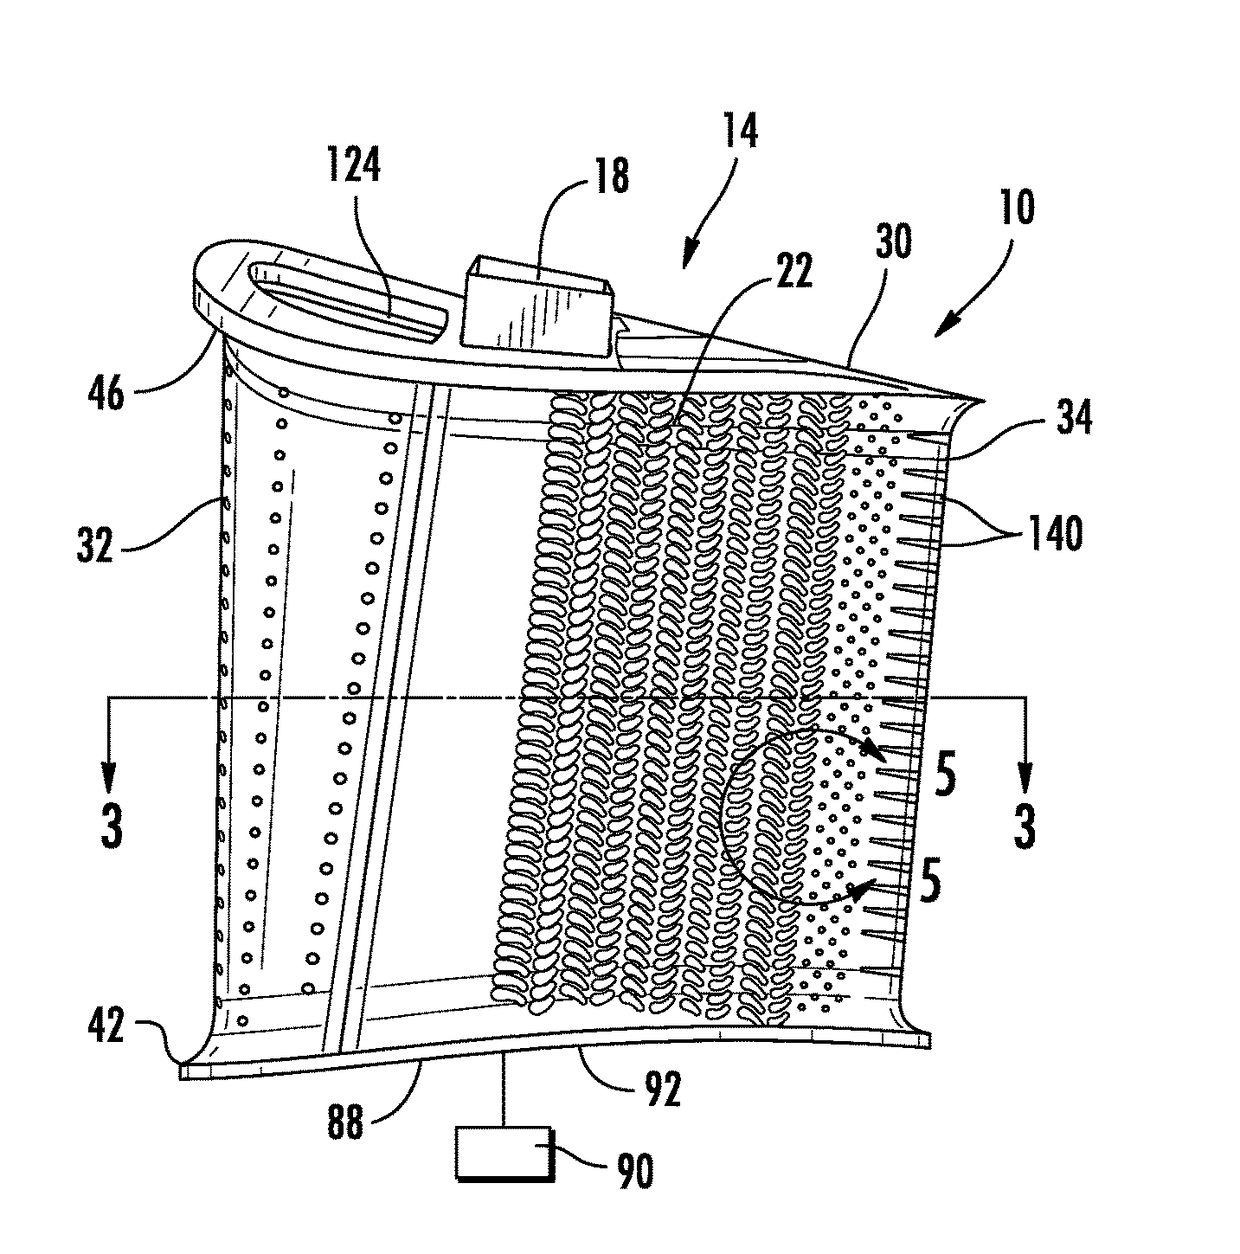 Internal cooling system with insert forming nearwall cooling channels in an aft cooling cavity of an airfoil usable in a gas turbine engine